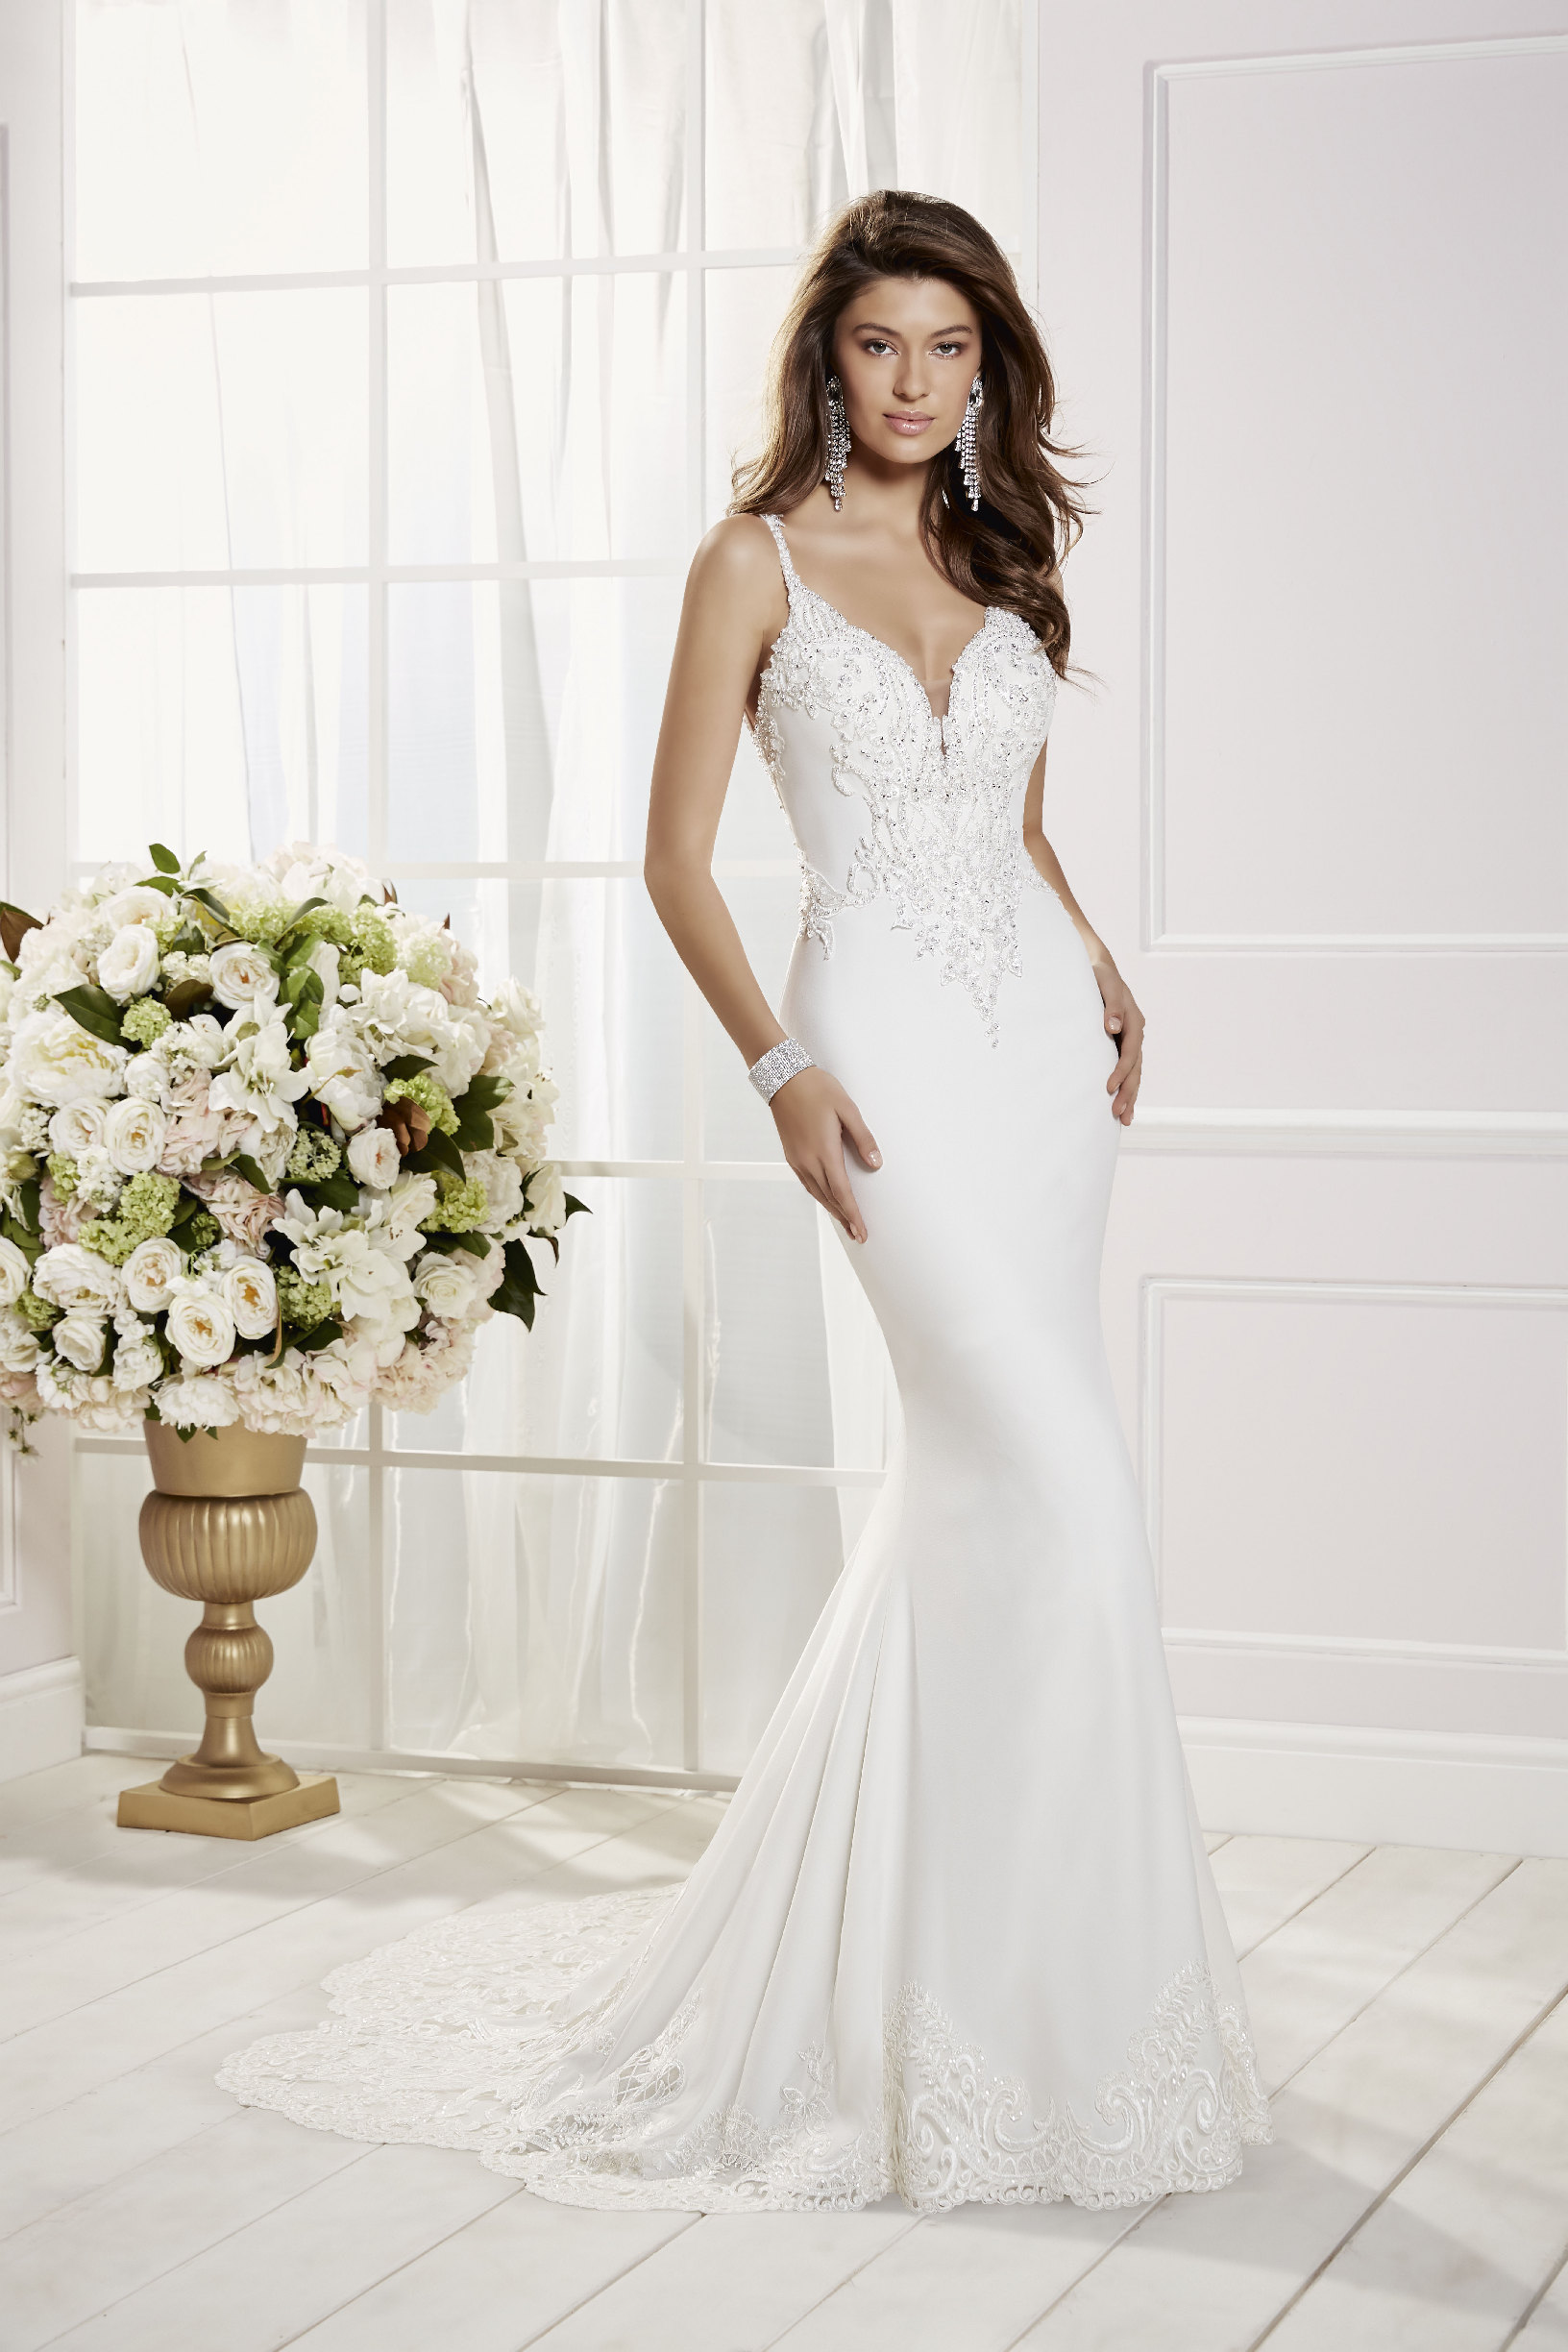 Model stood in a white room near cream flowers in Ronald Joyce 69458, a fishtail wedding dress with a beaded sweetheart neckline, delicate straps, a plain skirt and lace hem